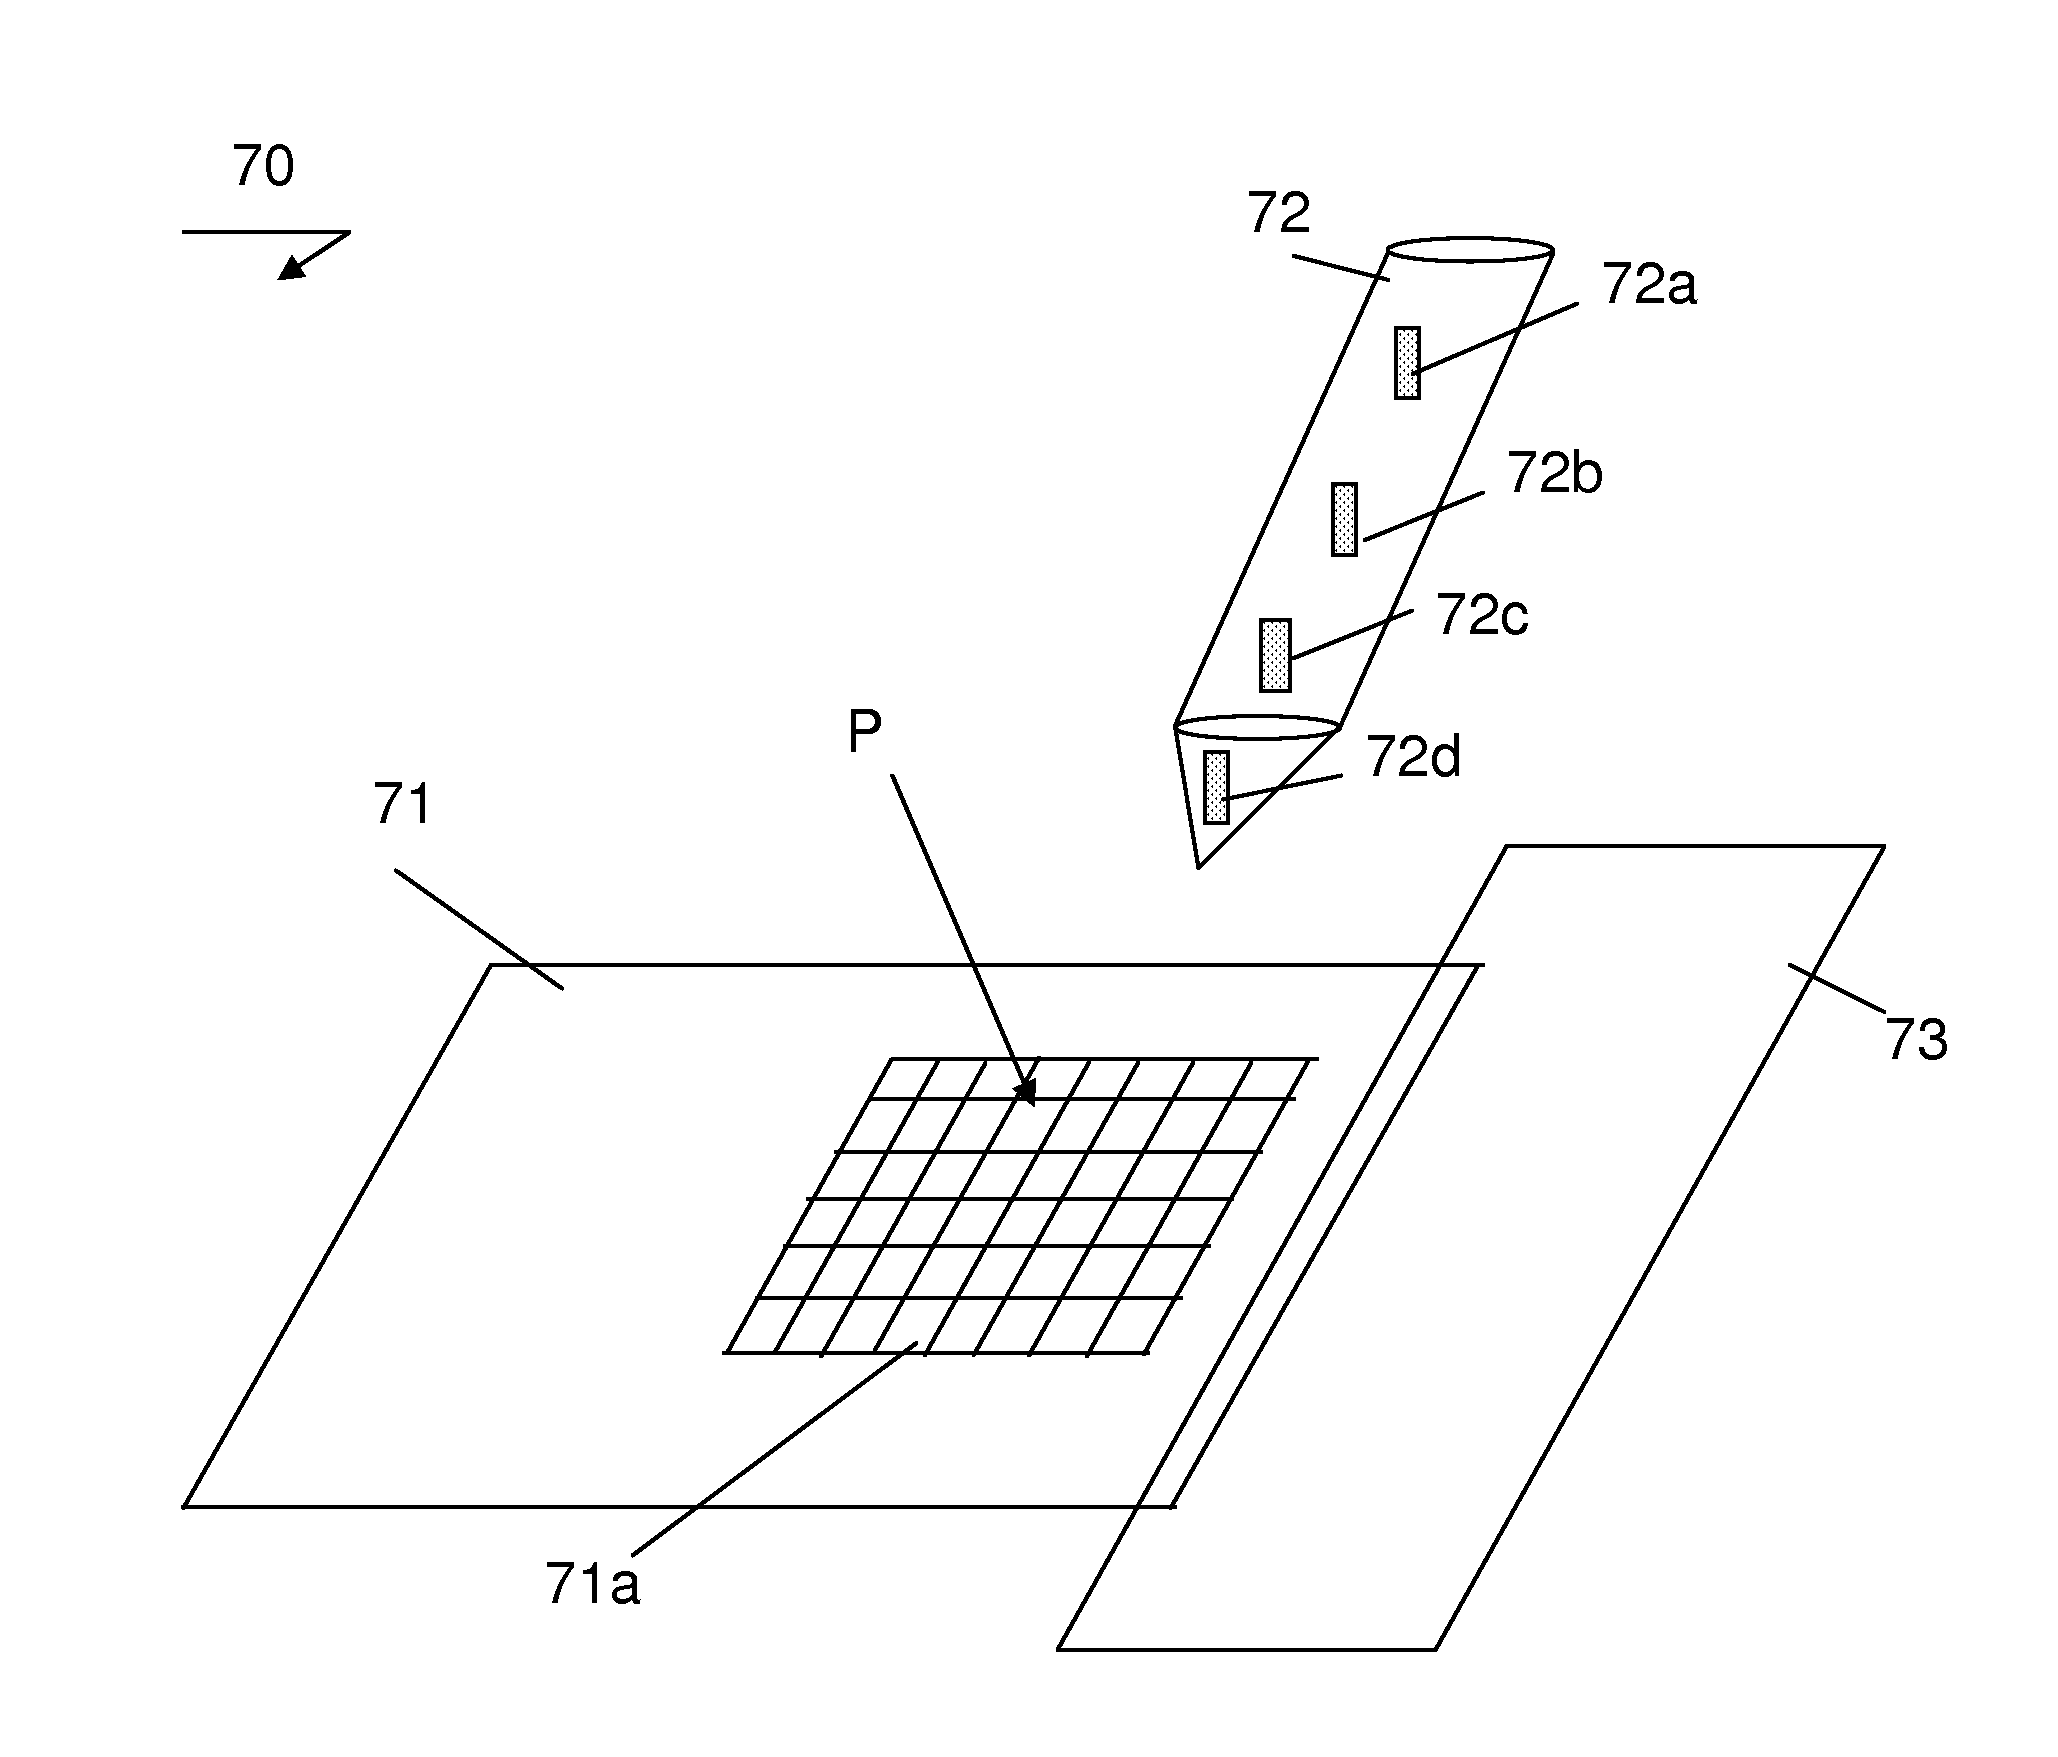 Electronic apparatus with improved functionality